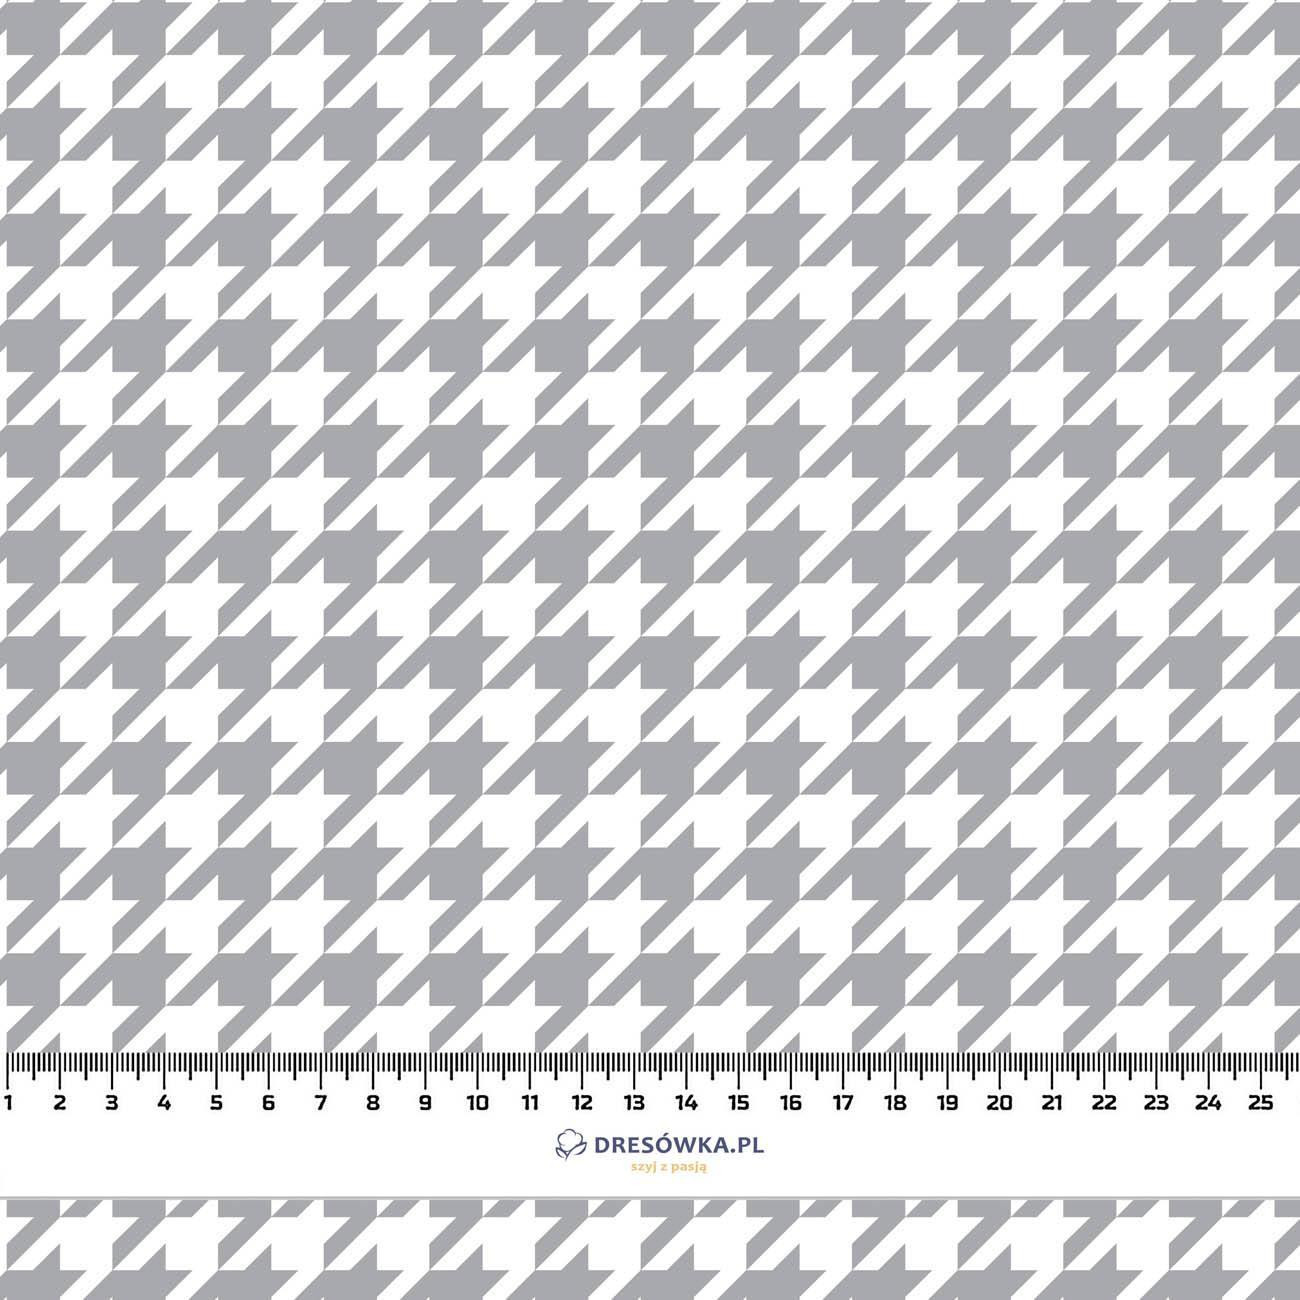 GREY HOUNDSTOOTH / WHITE - Cotton woven fabric